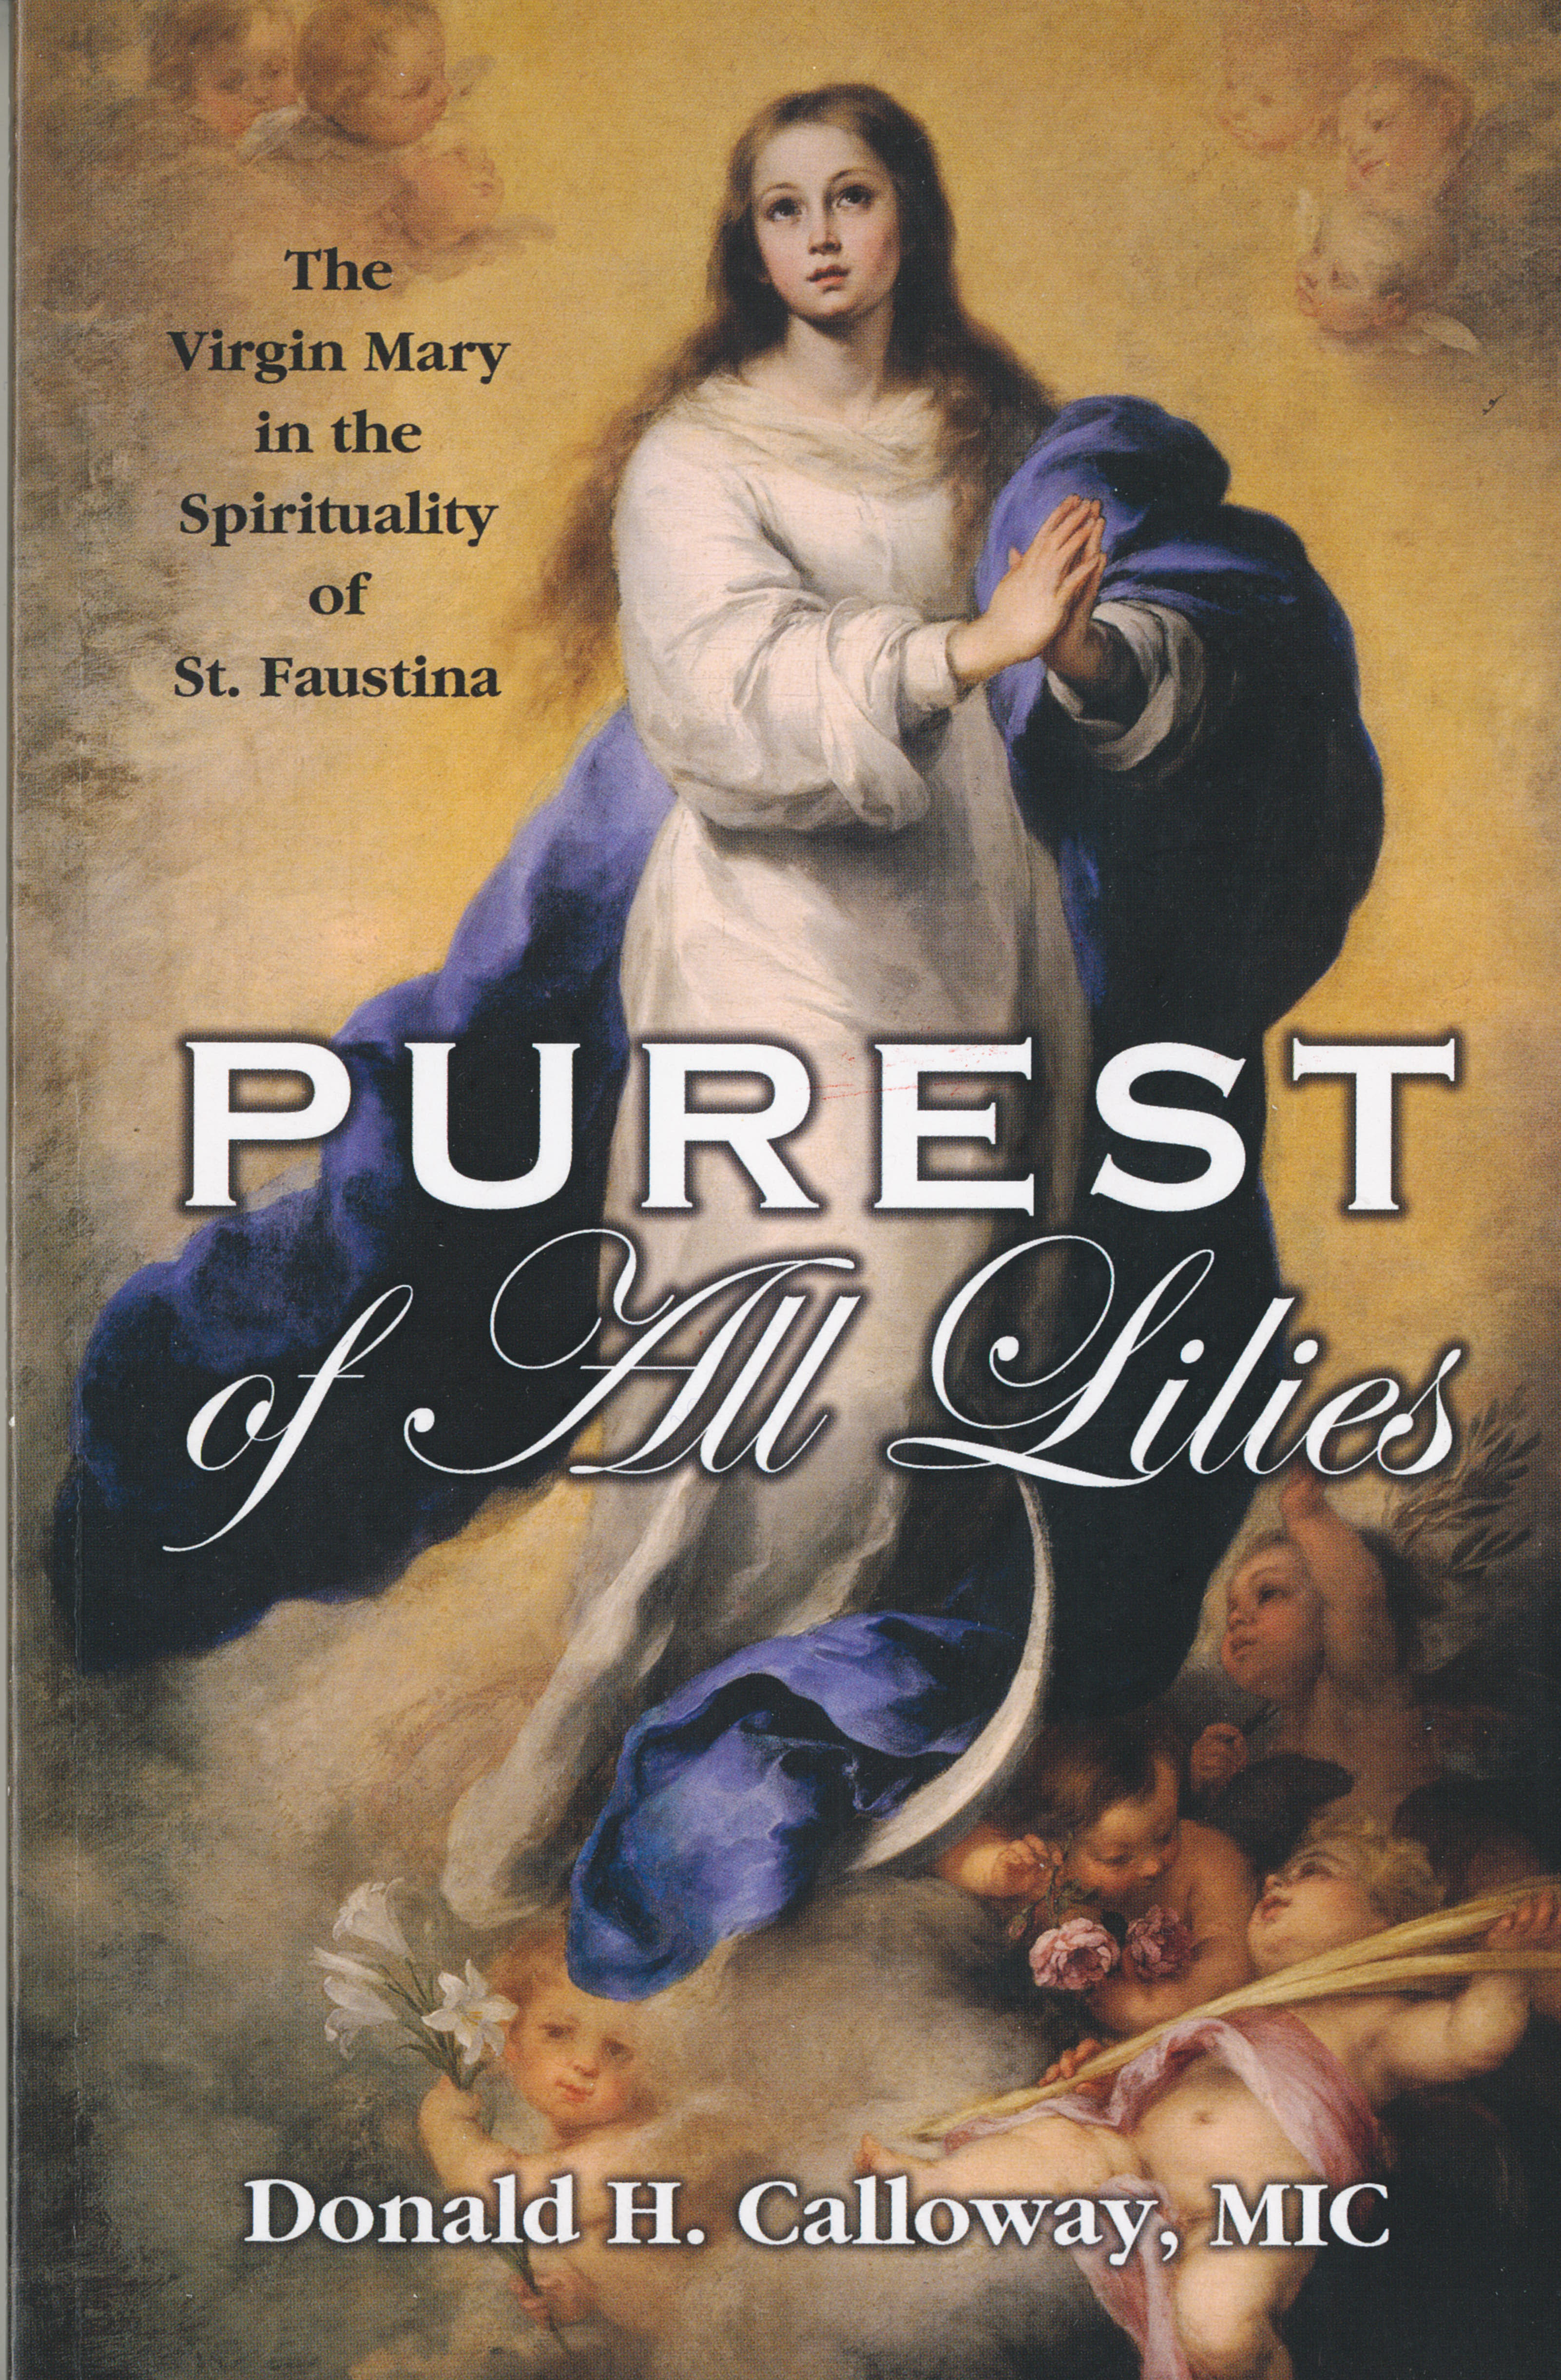 "Purest of All Lilies: The Virgin Mary in the Spirituality of St. Faustina" by Fr. Donald Calloway MIC